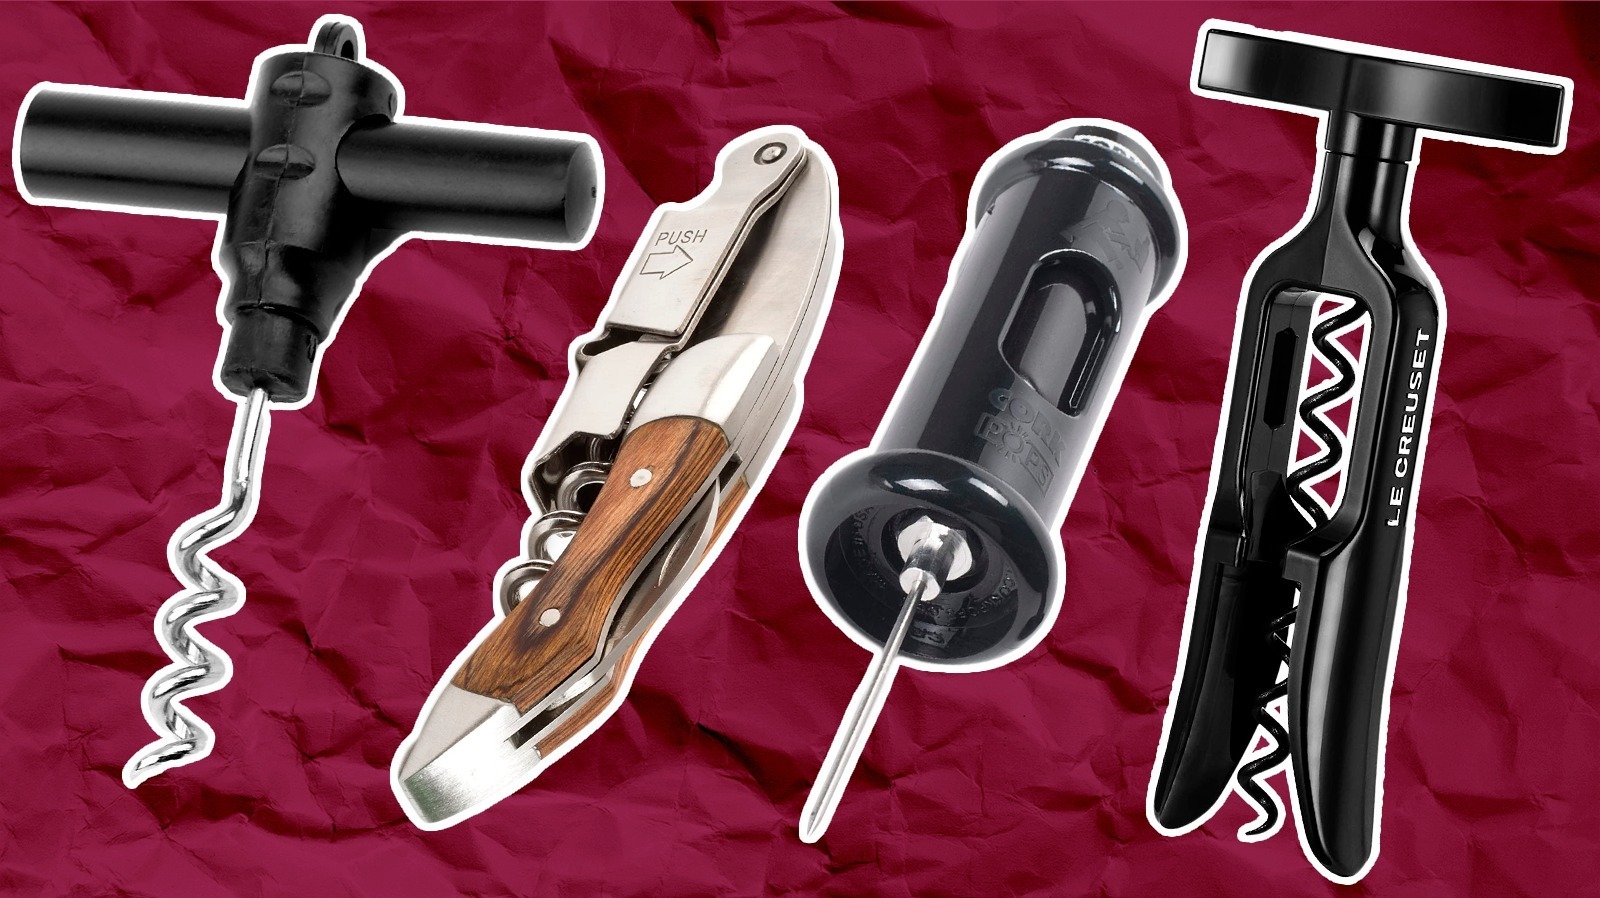 https://www.tastingtable.com/img/gallery/13-types-of-corkscrews-and-other-wine-openers-explained/l-intro-1683677002.jpg